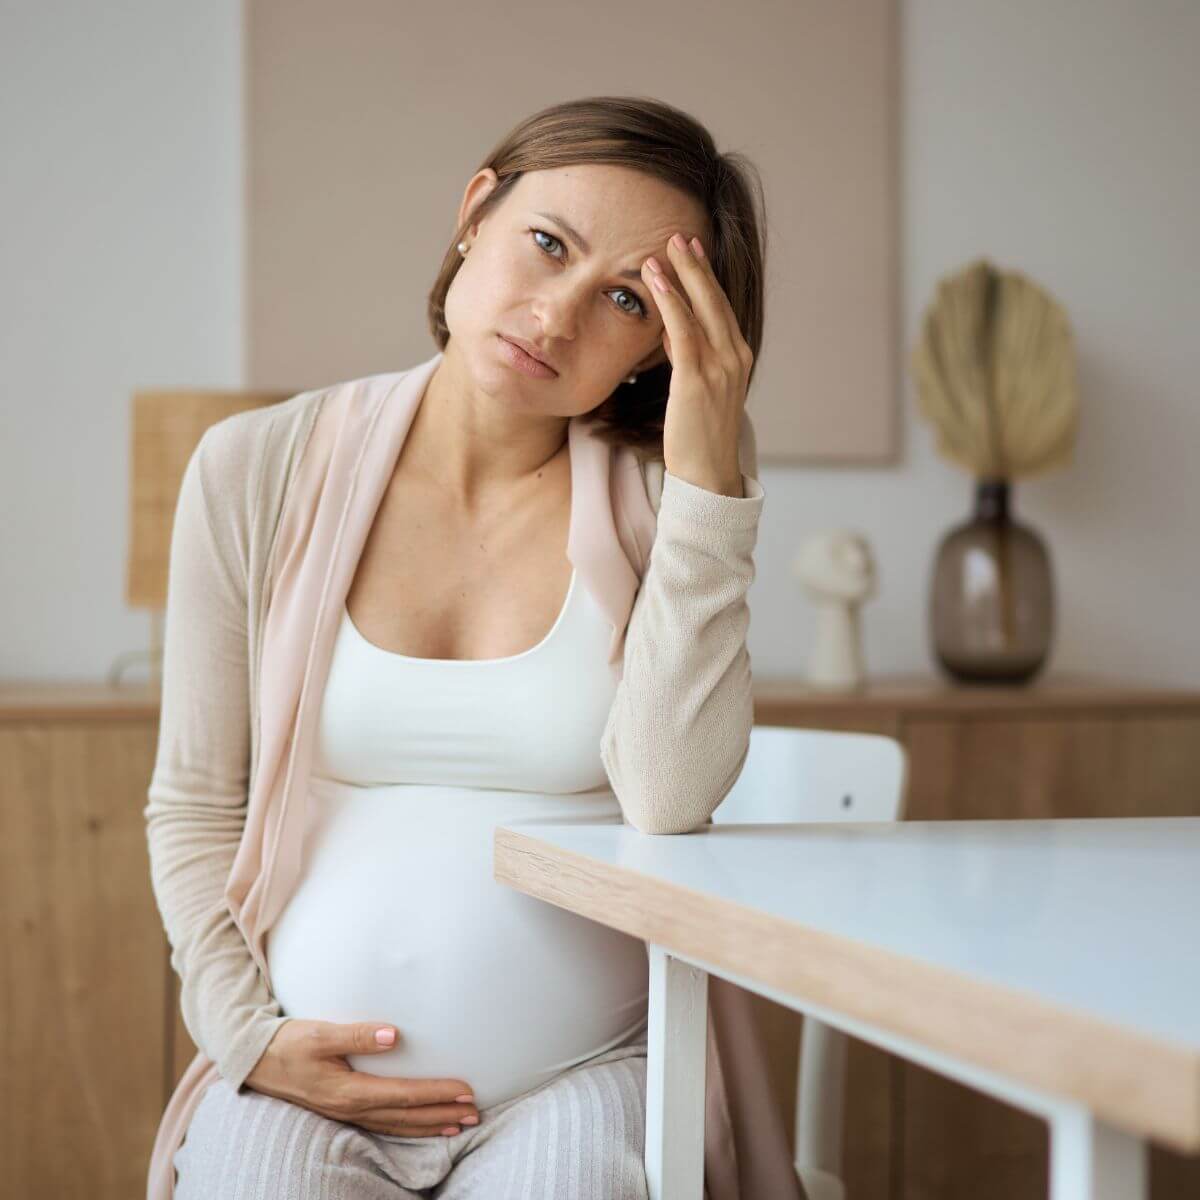 A pregnant woman is sitting in a chair at a table. She has her right hand cupped under her stomach and her left hand on her forehead. She is staring into the camera.